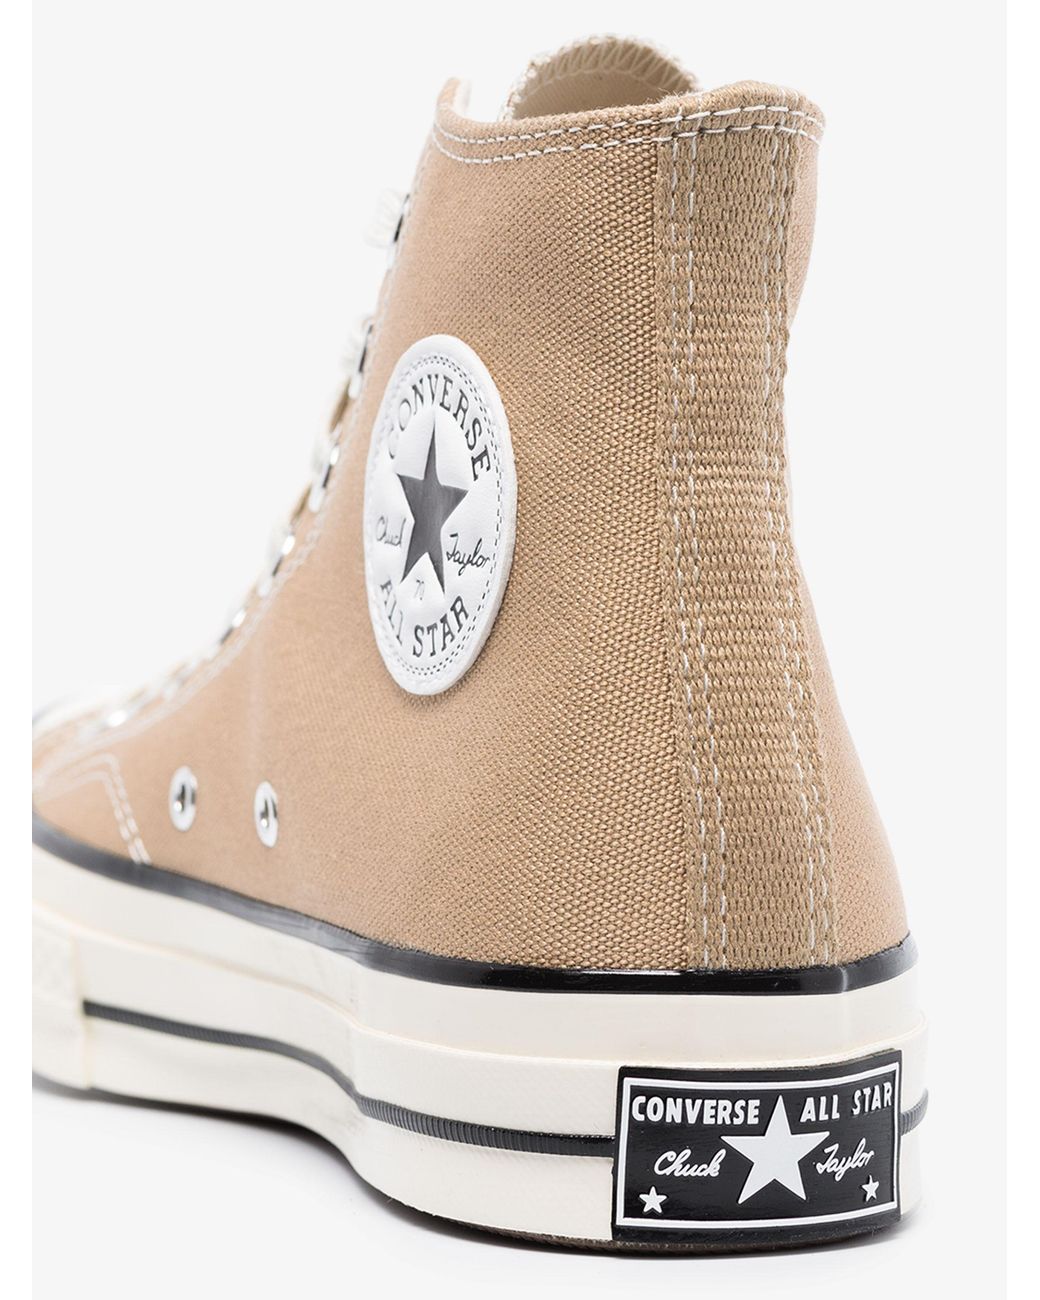 Converse Chuck 70 High Top Sneakers in Brown |